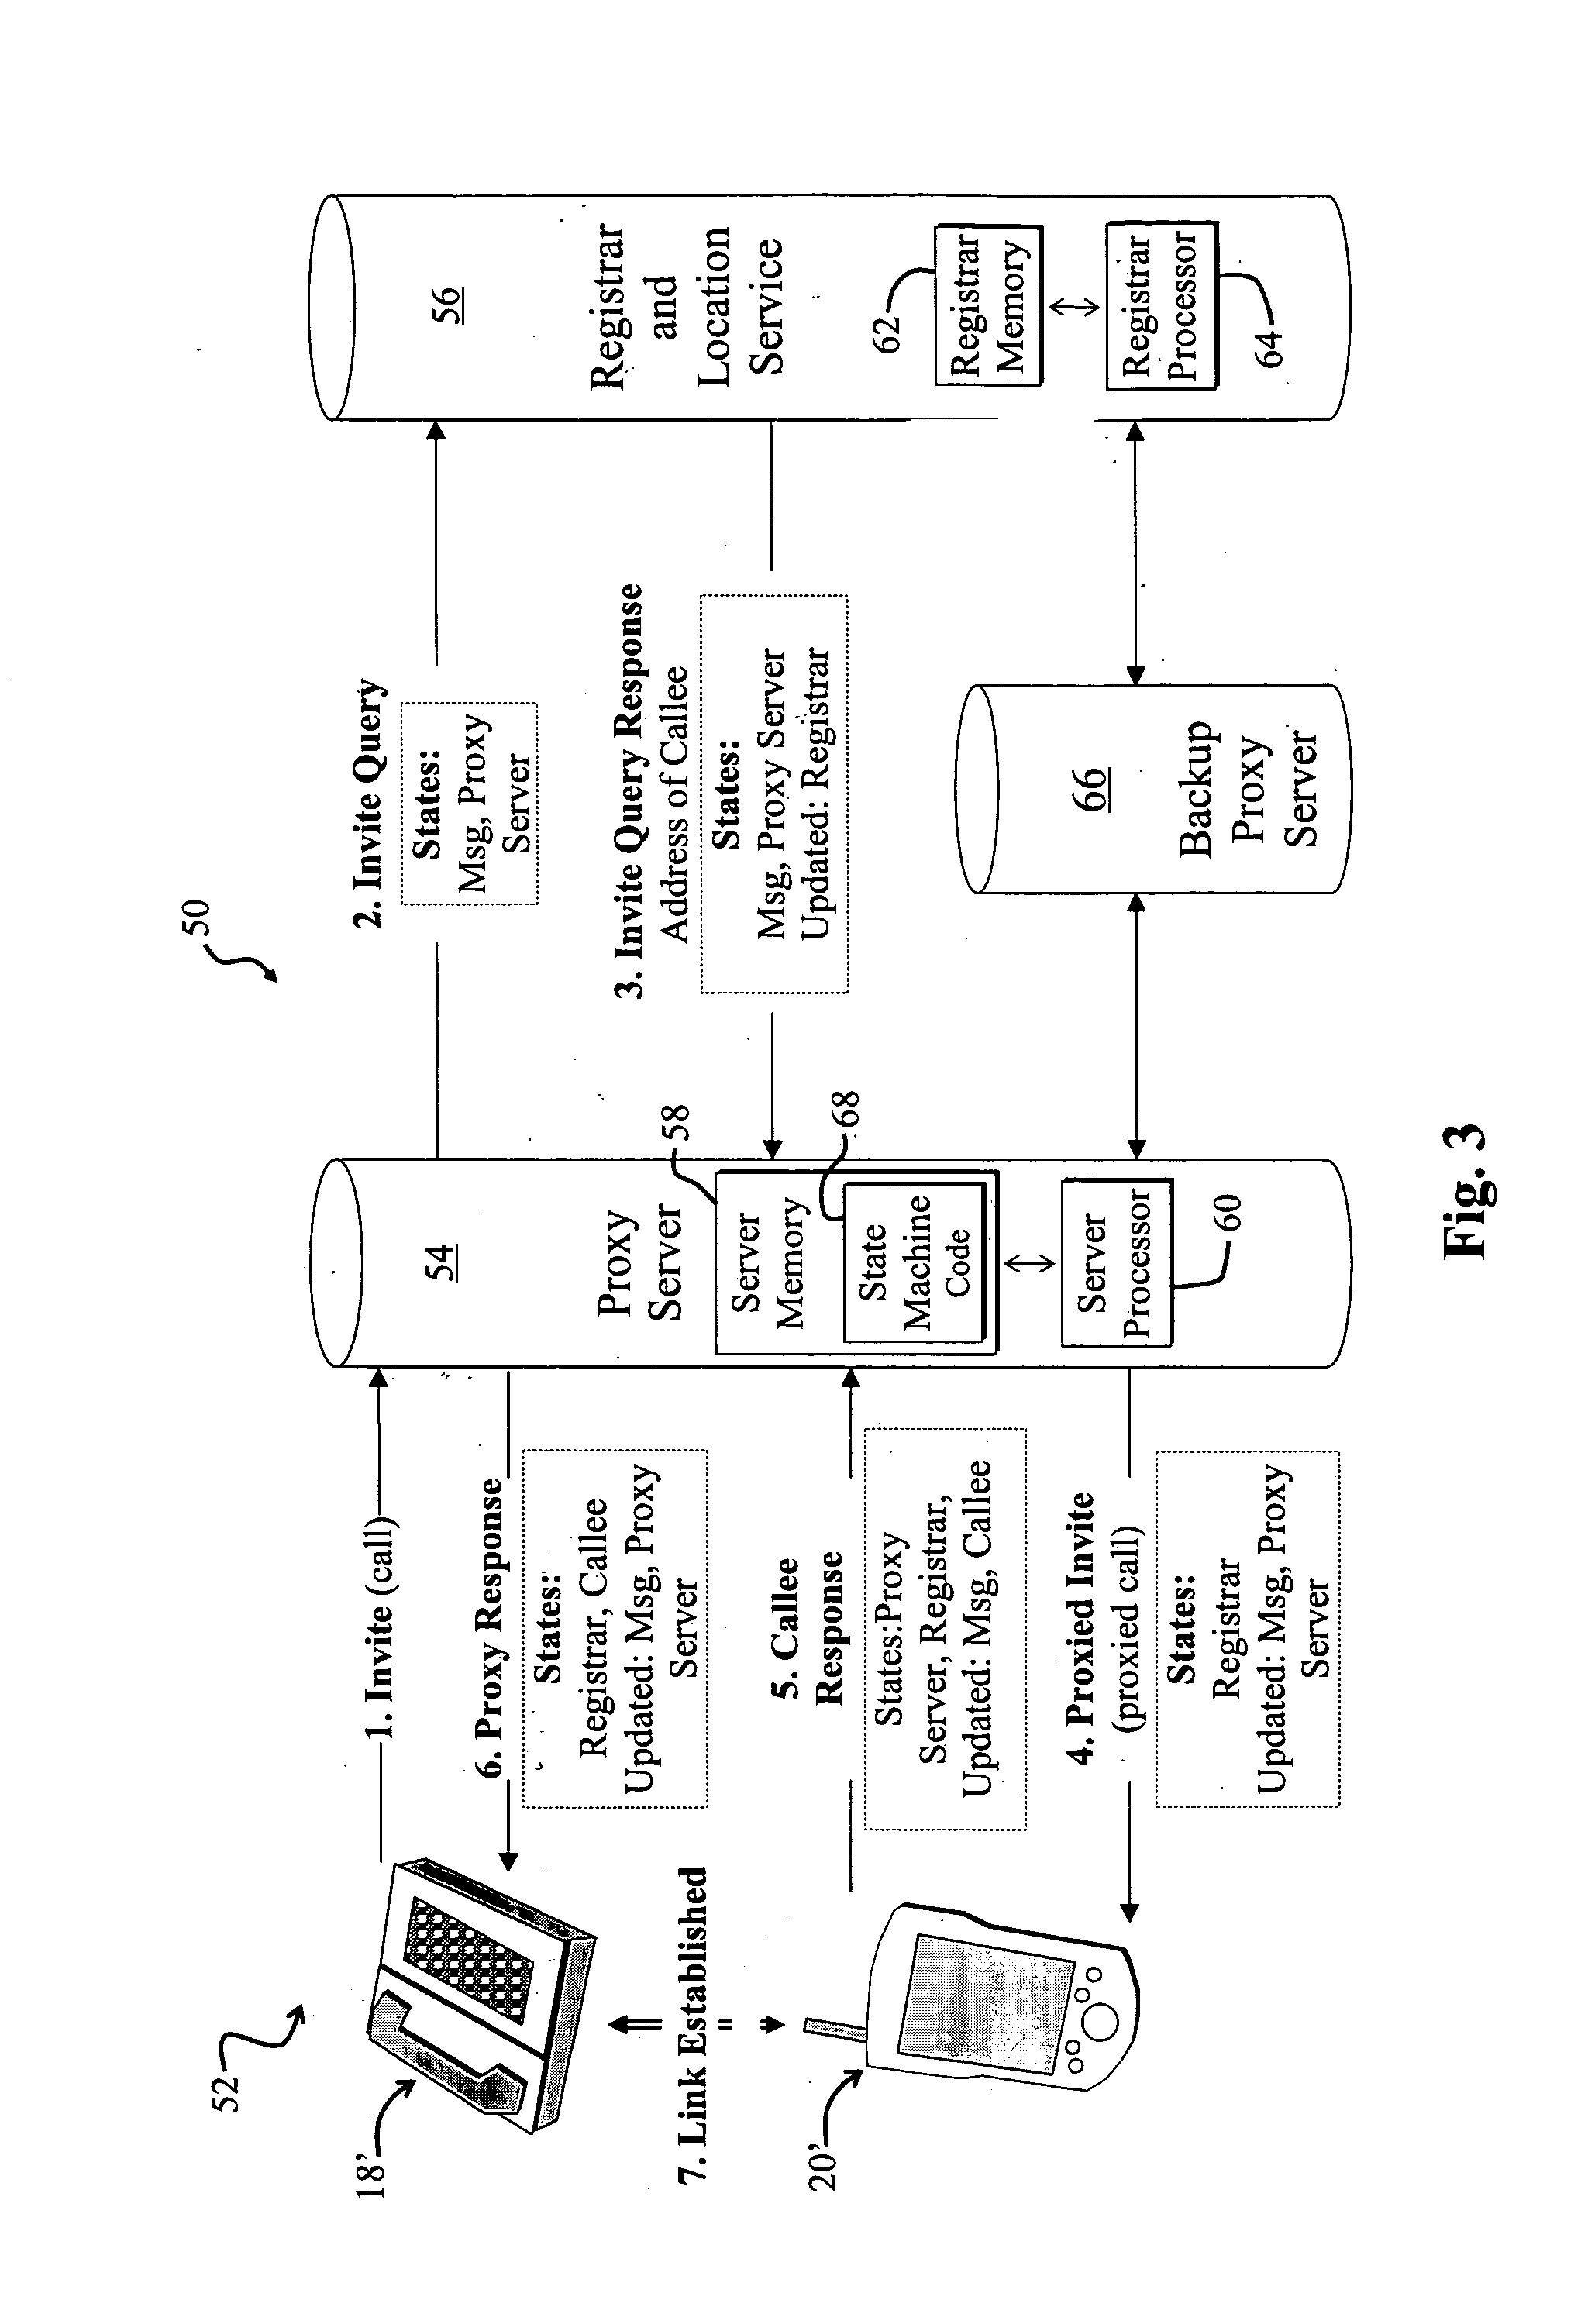 Transferring state information in a network